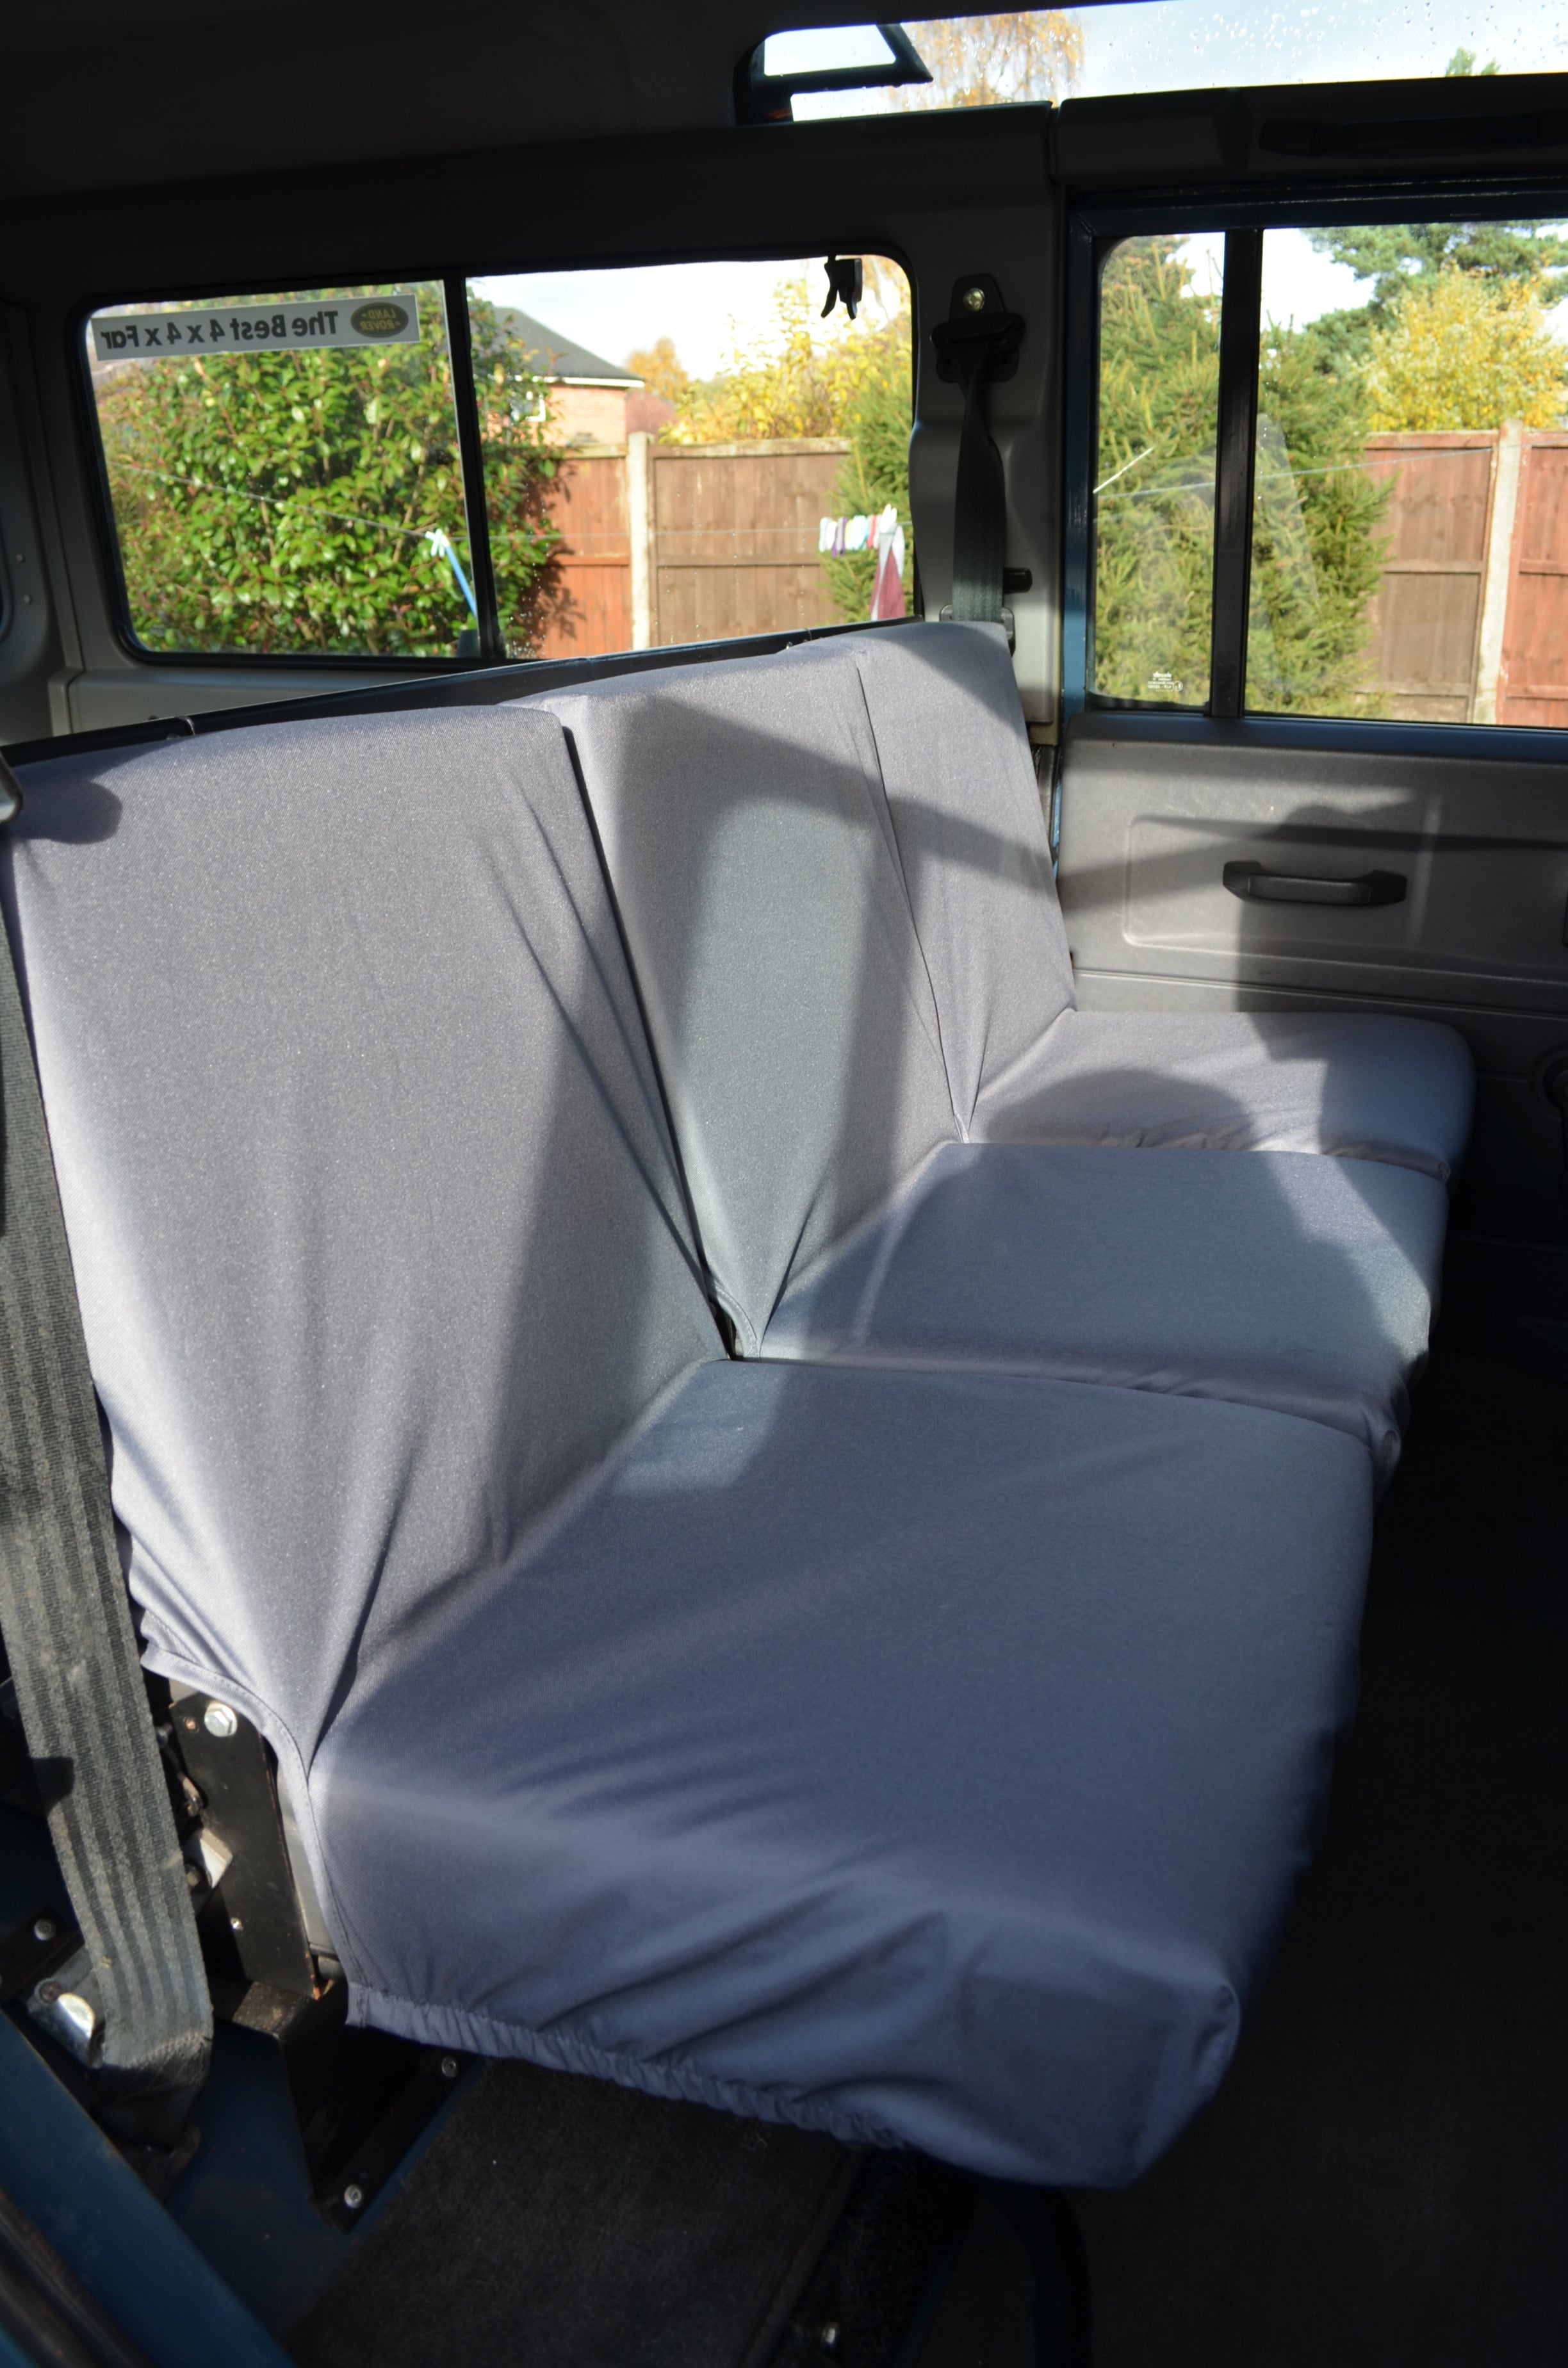 Land Rover Defender 1983 - 2007 Rear Seat Covers 2nd Row 3 Singles / Grey Turtle Covers Ltd